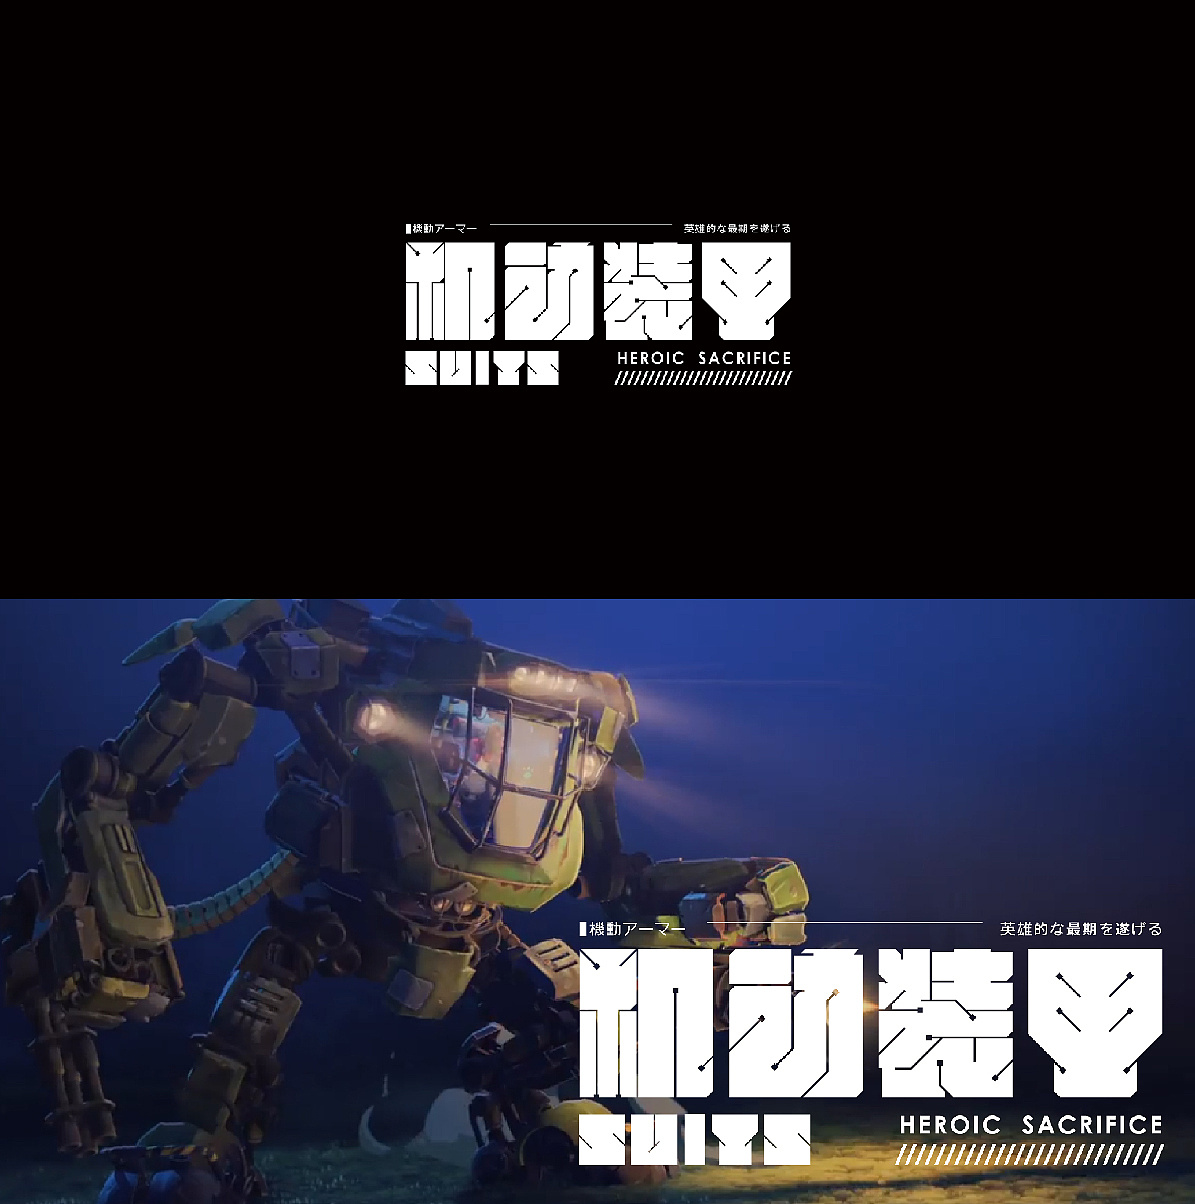 Chinese Creative Font Design-Chinese Creative Font Design with Love, Death and Robot as Themes